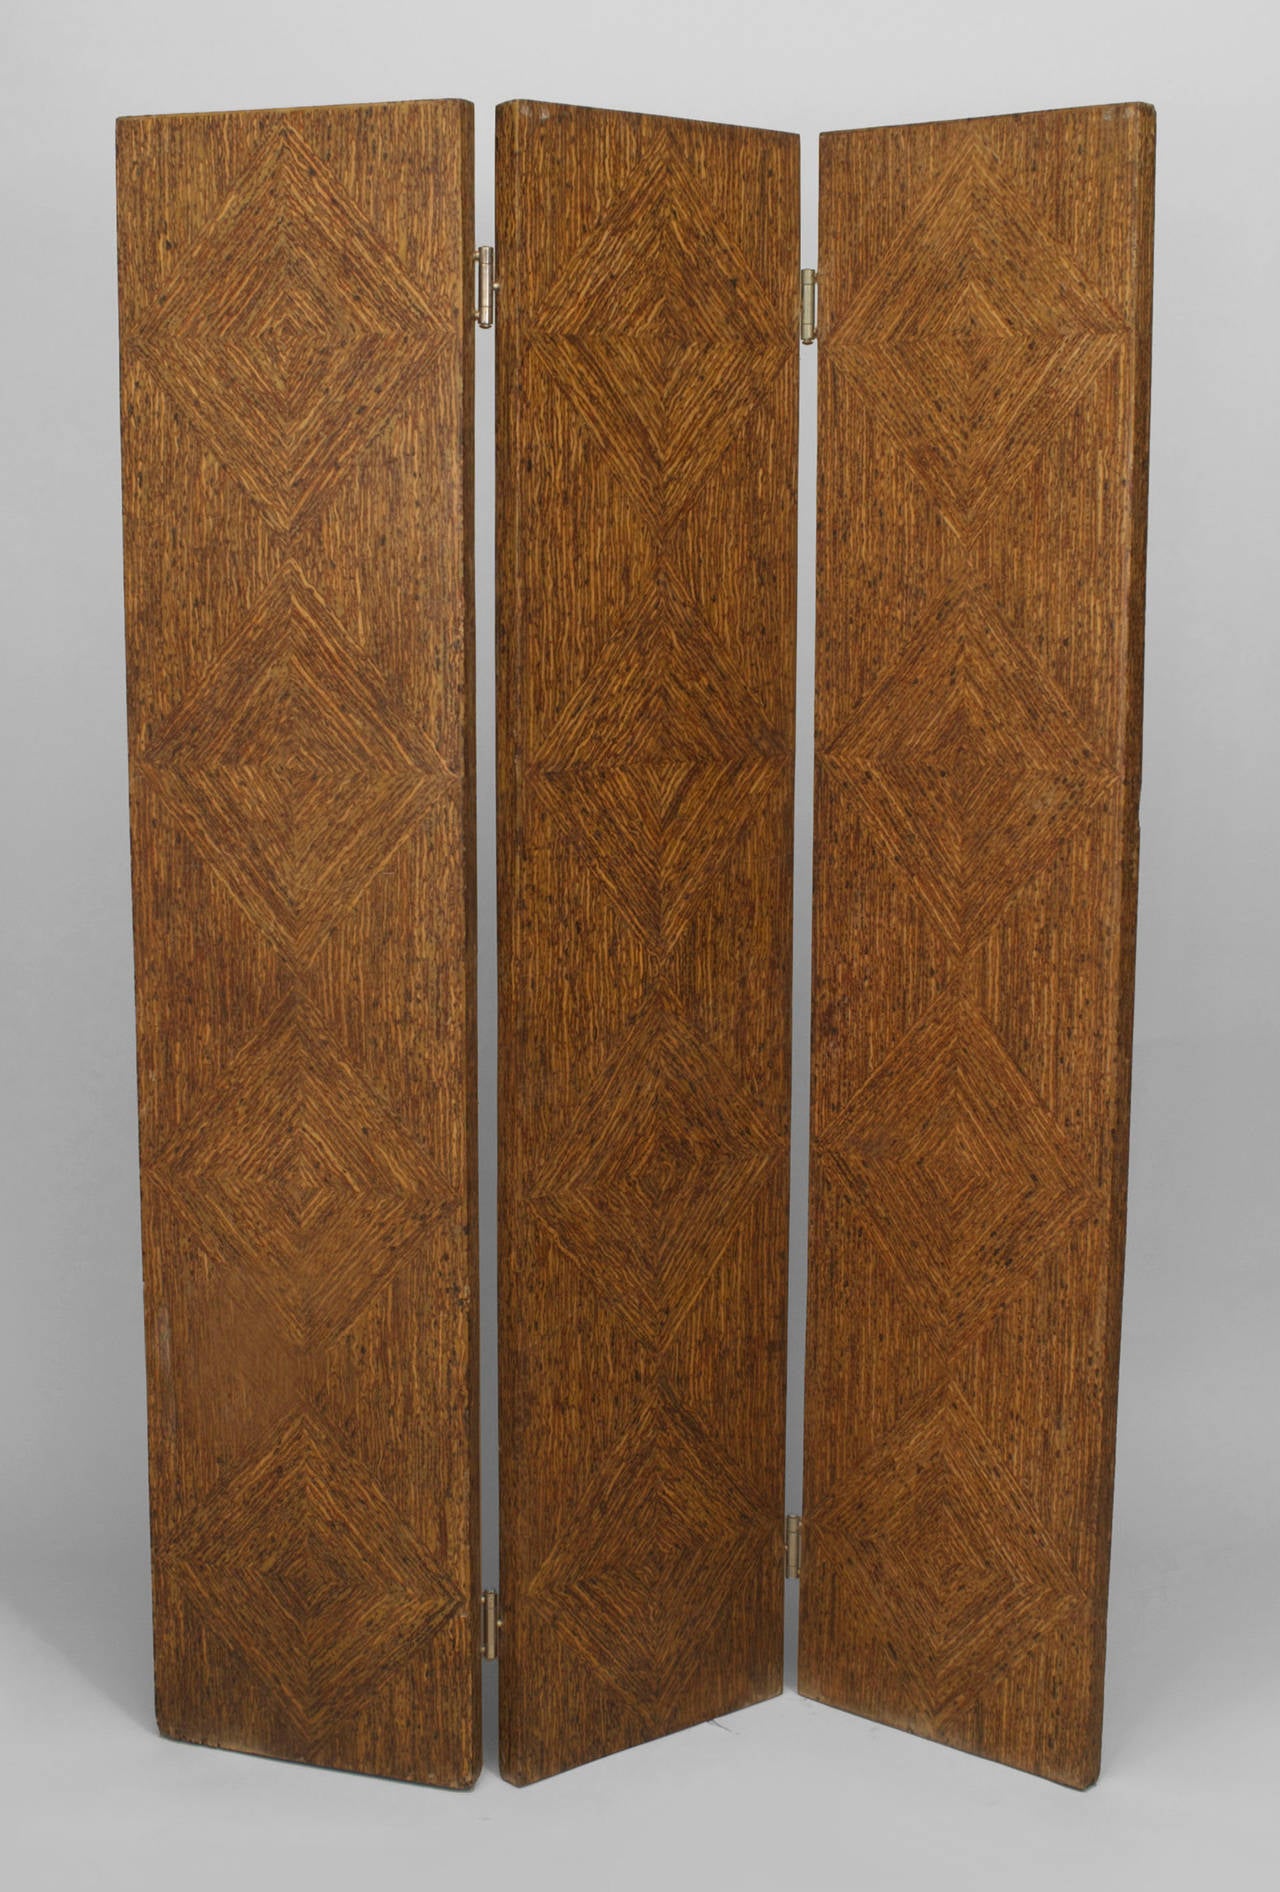 Pair of American Art Moderne (1940s) rust painted faux woven rush 3 fold screens with diamond design (priced as a Pair)